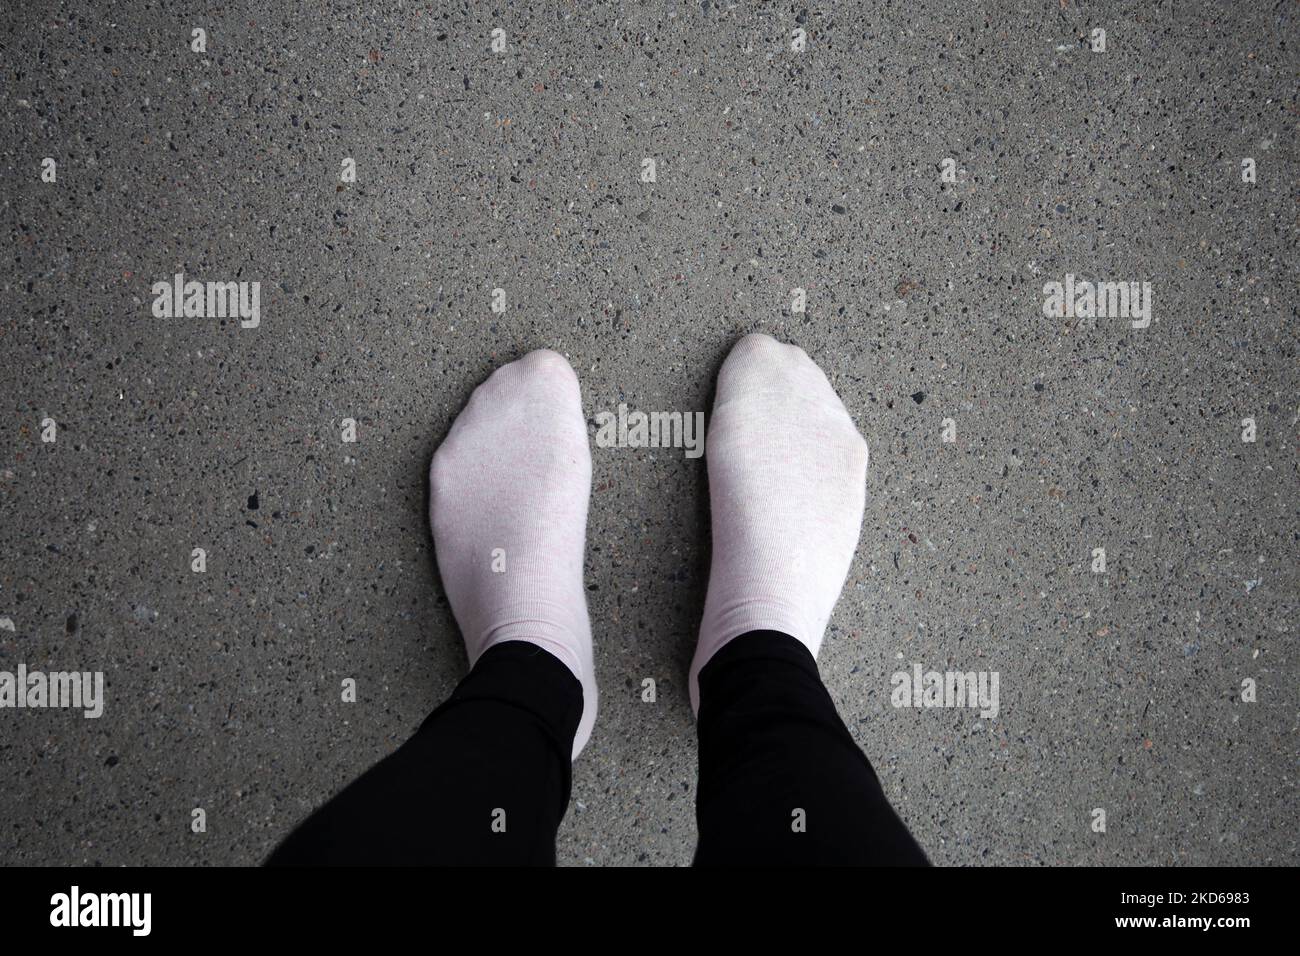 Woman standing on a grey concrete floor while wearing black leggings and pink socks. Color image of unrecognizable person. Stock Photo